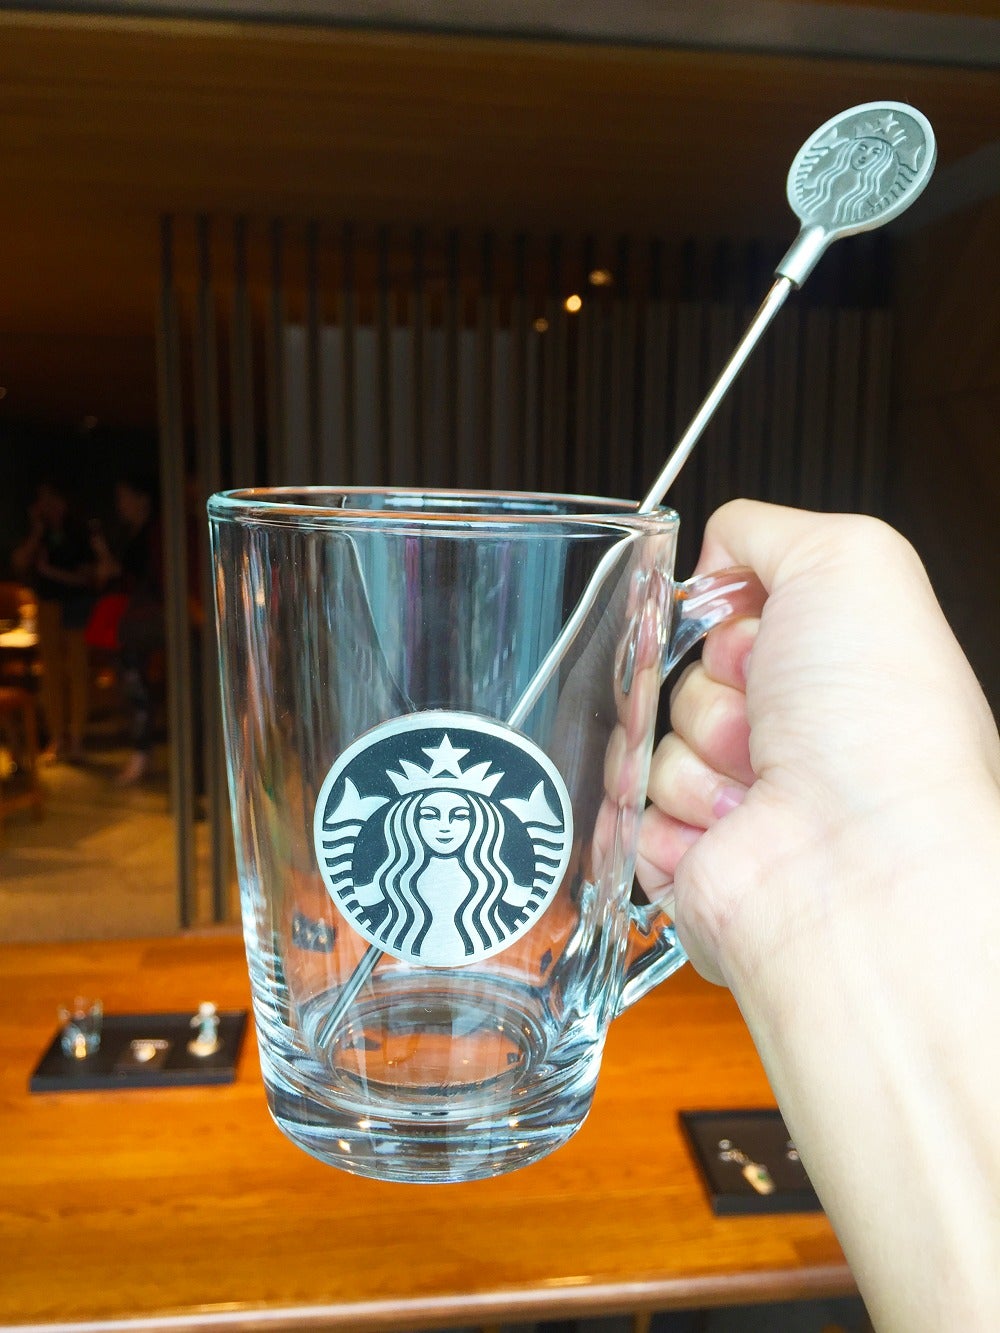 Starbucks x Royal Selangor Collection is Launching on Dec 21 & Looks Super Exquisite! - WORLD OF BUZZ 6